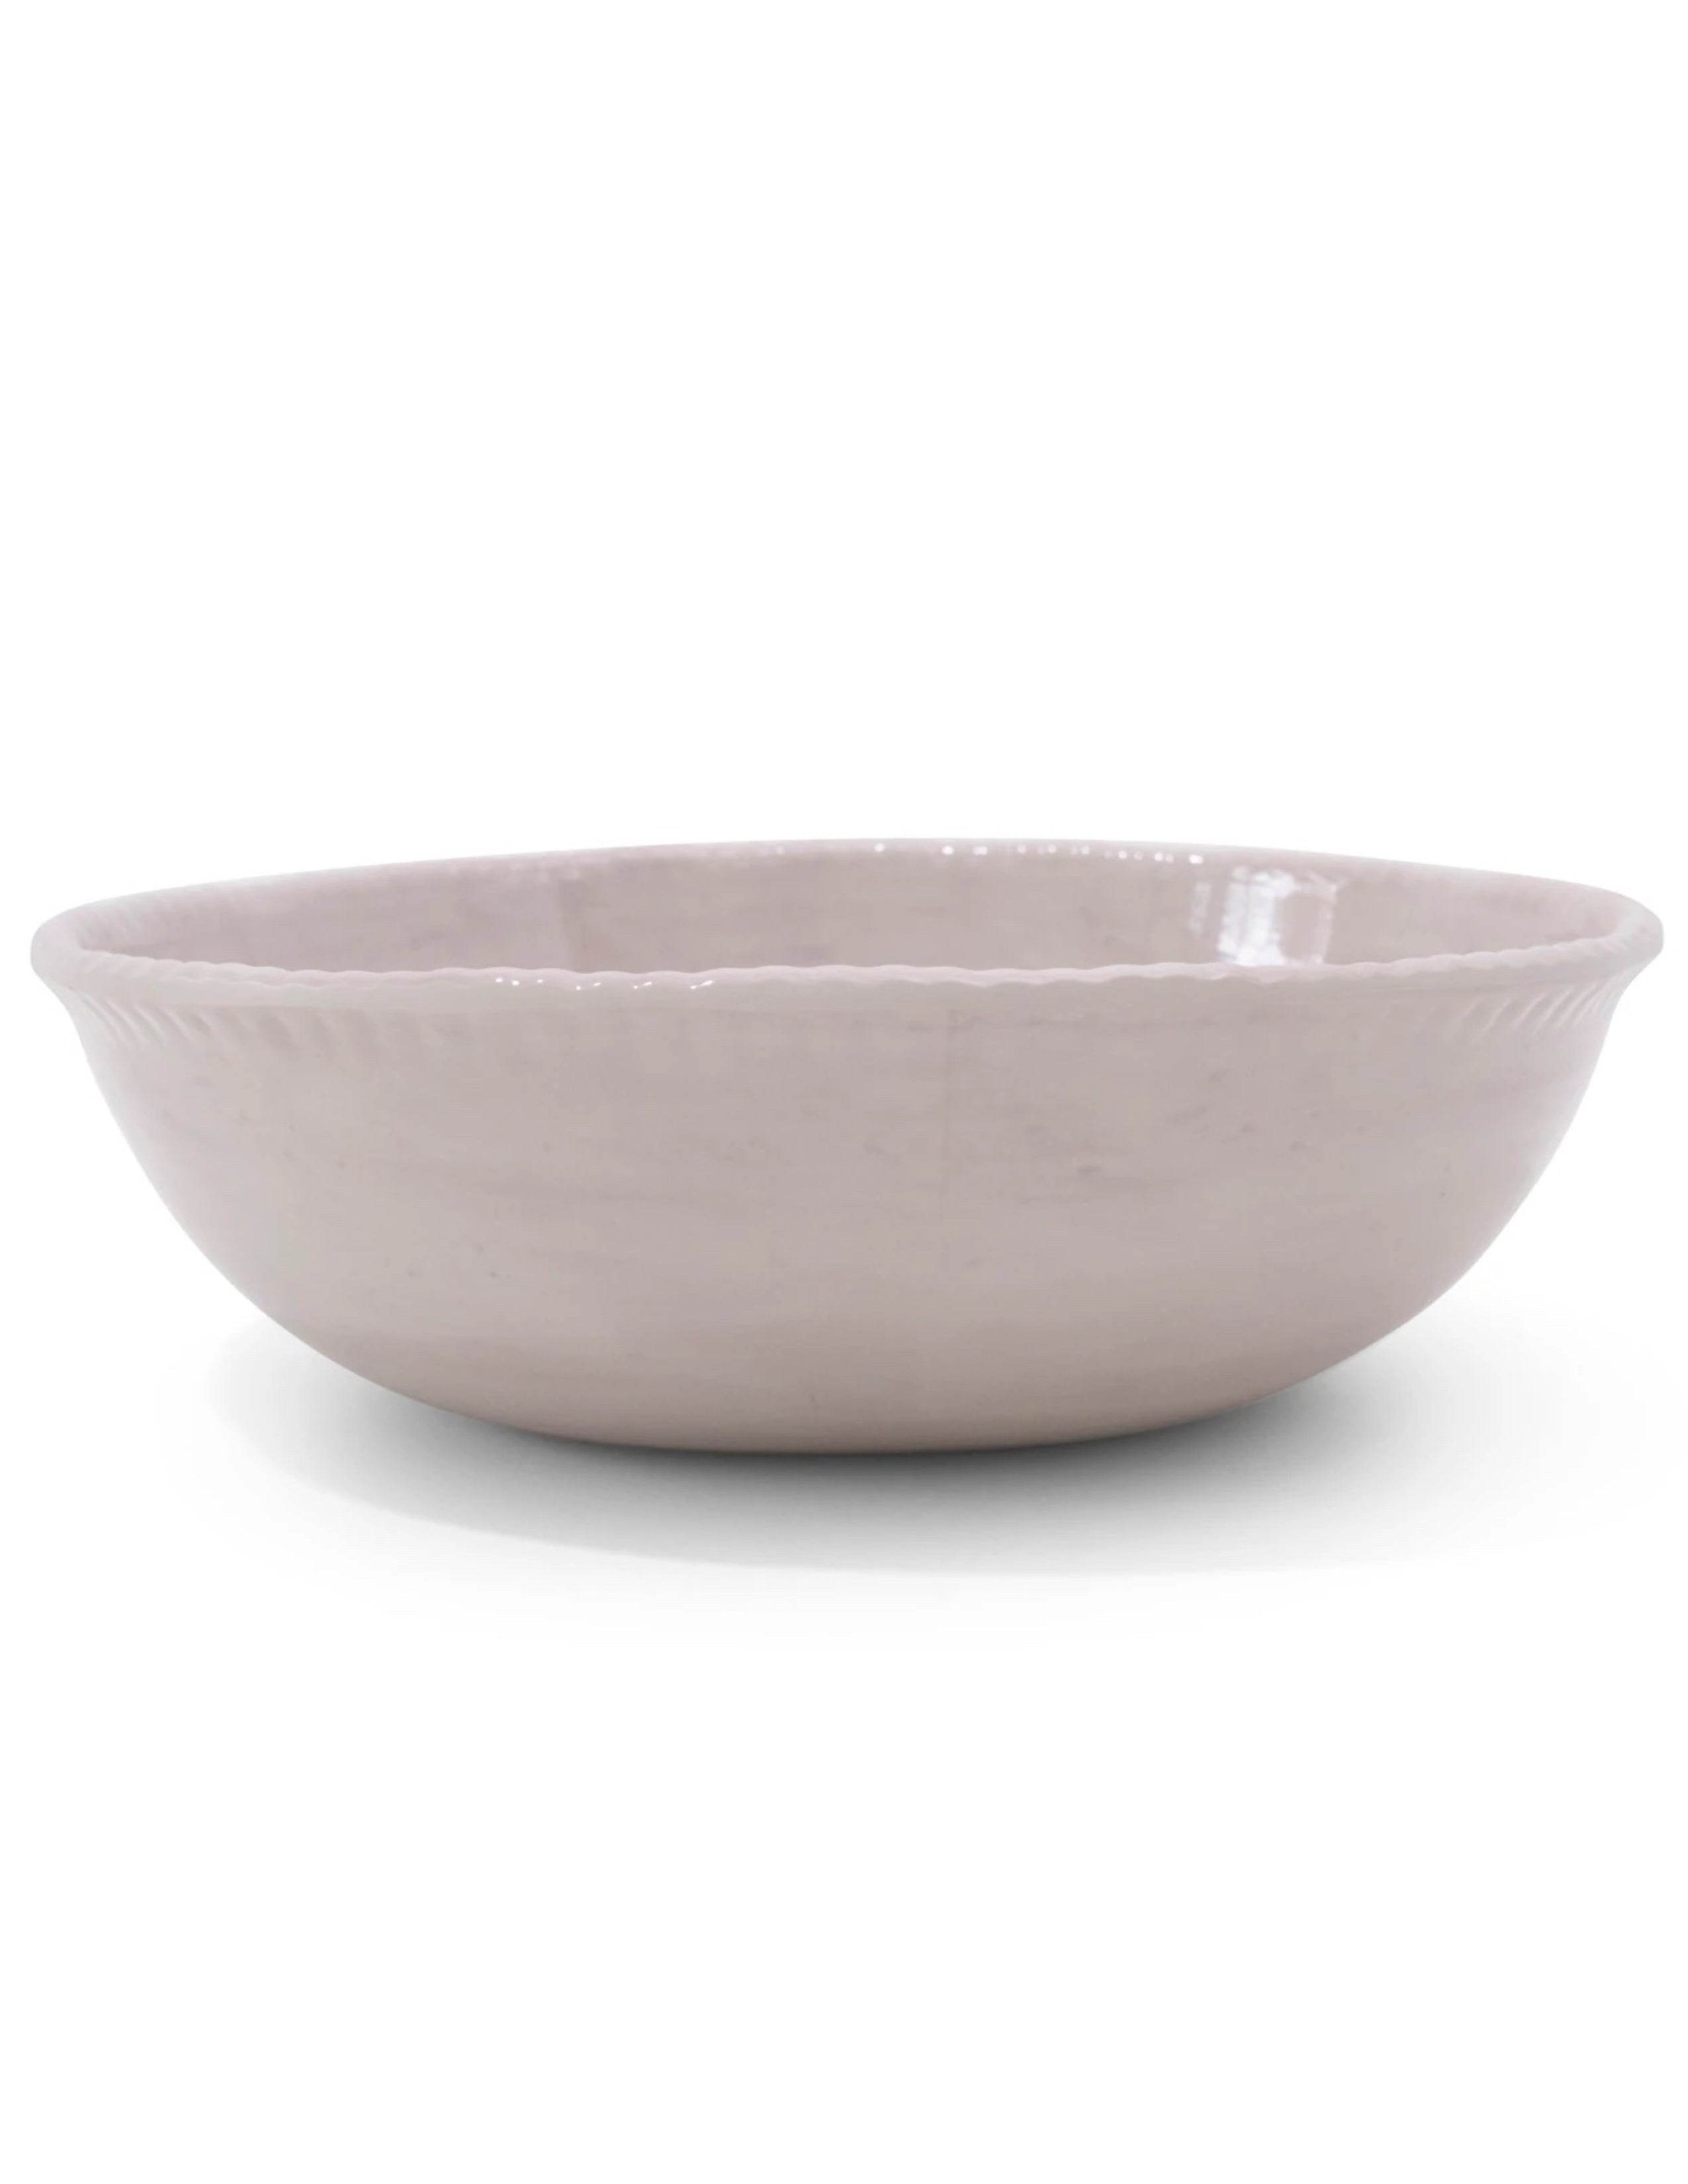 Beaded Serving Bowl - Taupe